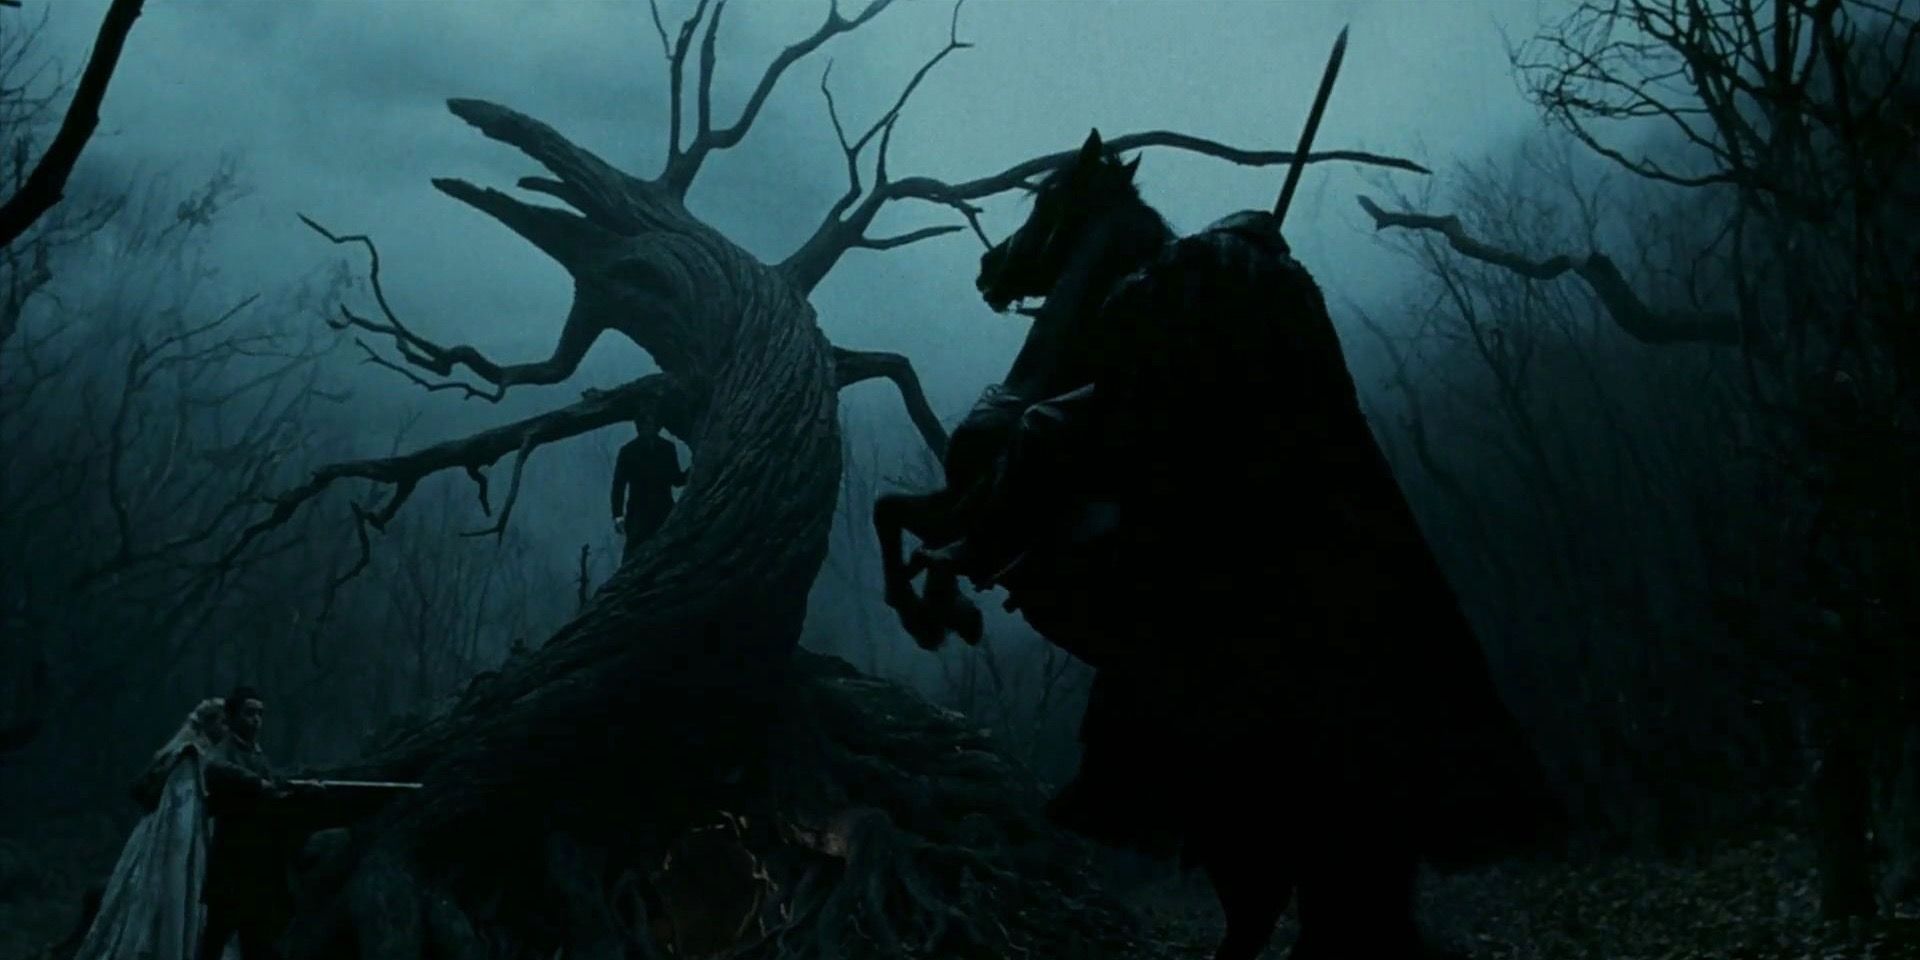 The Headless Horseman in Sleepy Hollow riding in the night